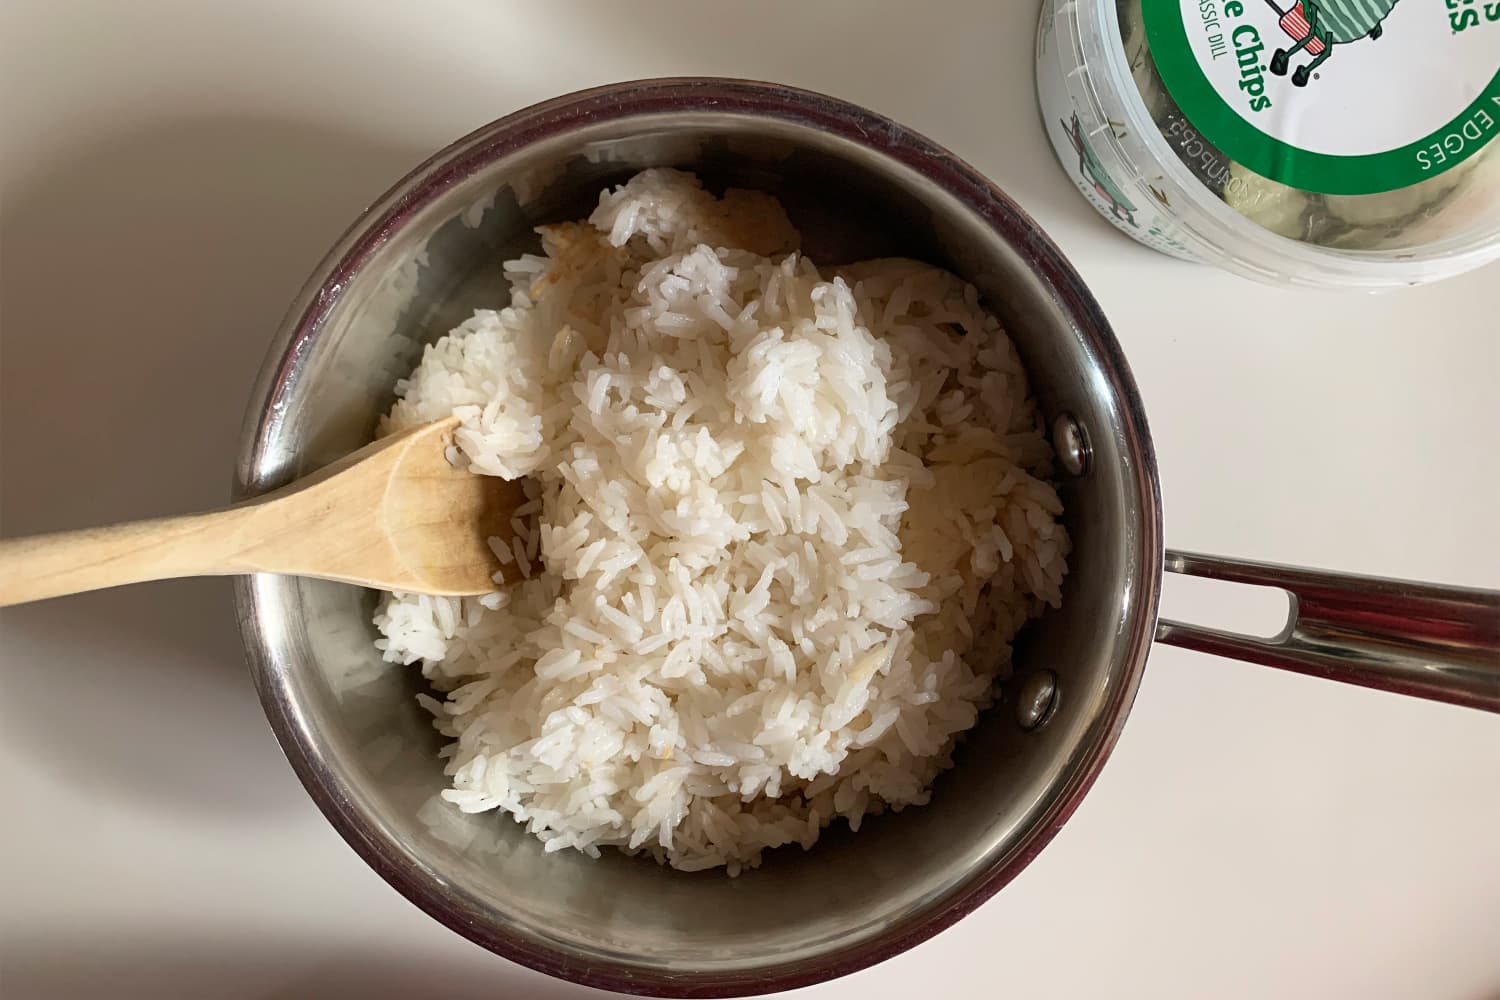 I Tried Cooking Rice in Pickle Juice and It's My New Go-To for Lunch